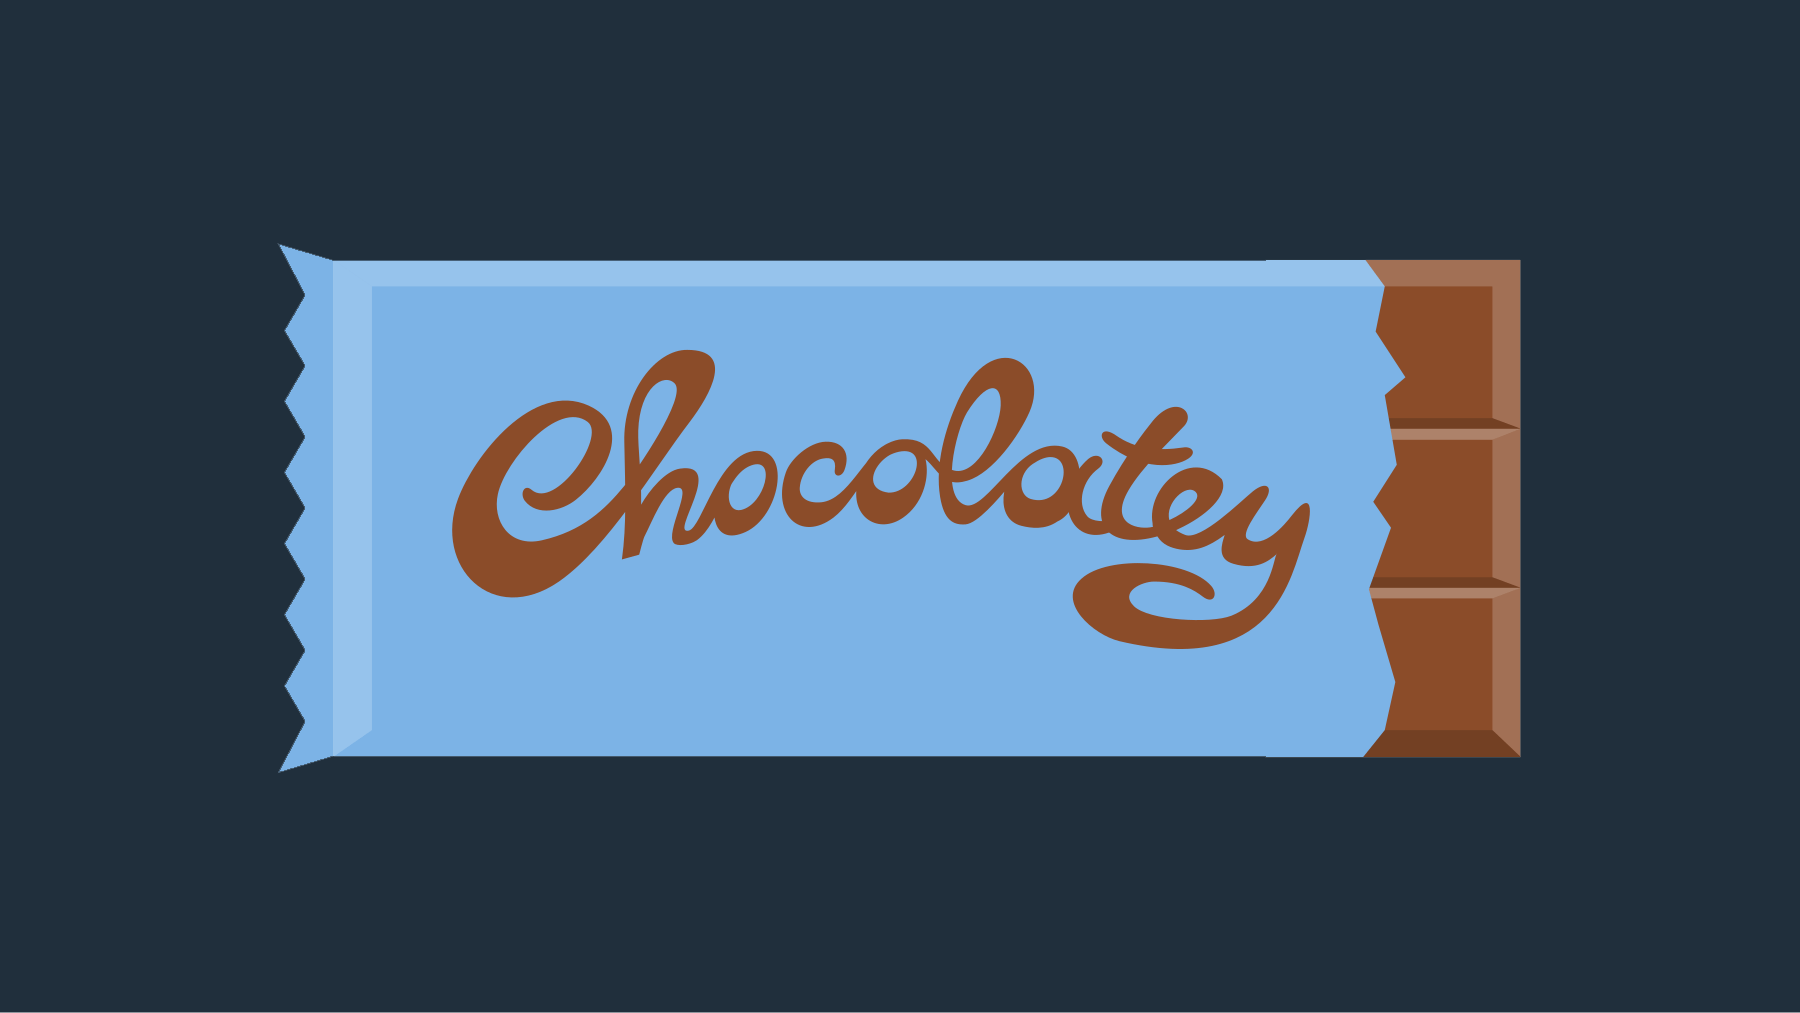 How to install Chocolatey and manage software with it